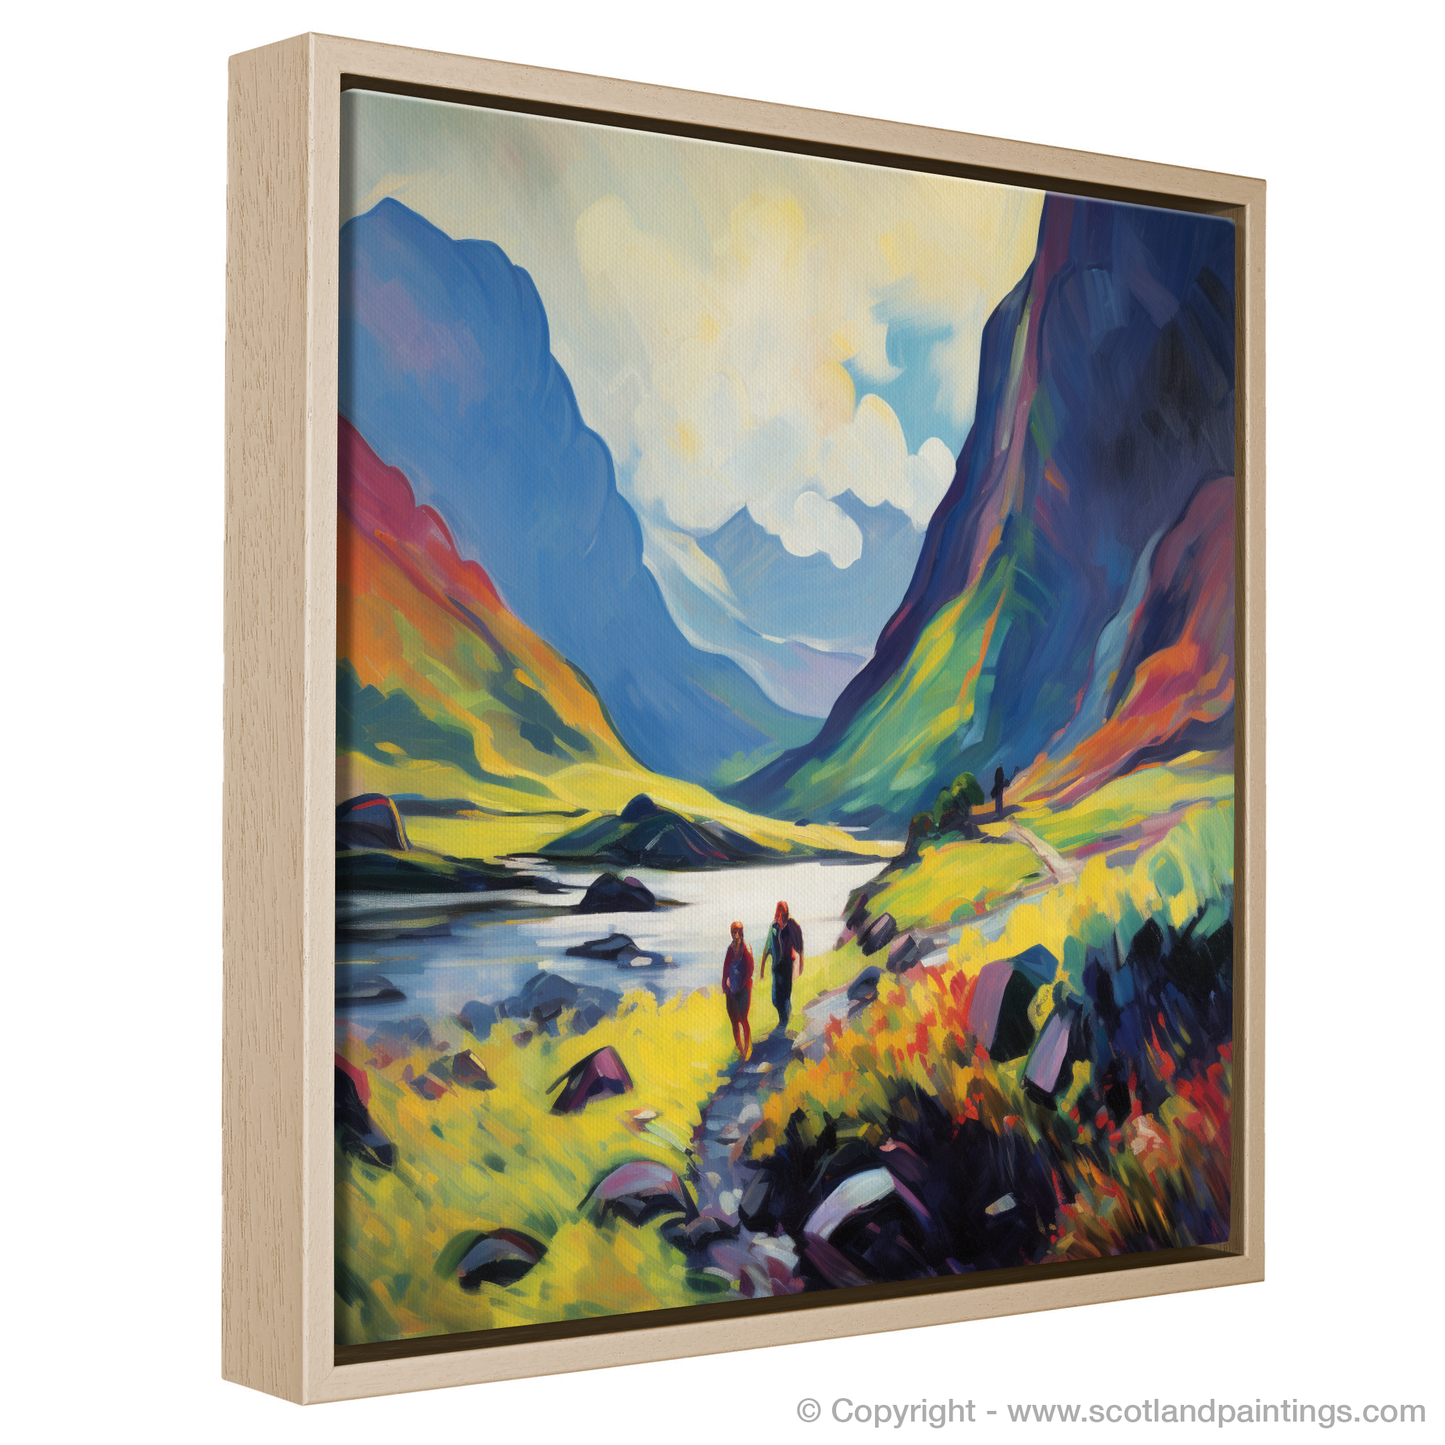 Hikers in Glencoe: A Fauvist Ode to Scotland's Wild Majesty